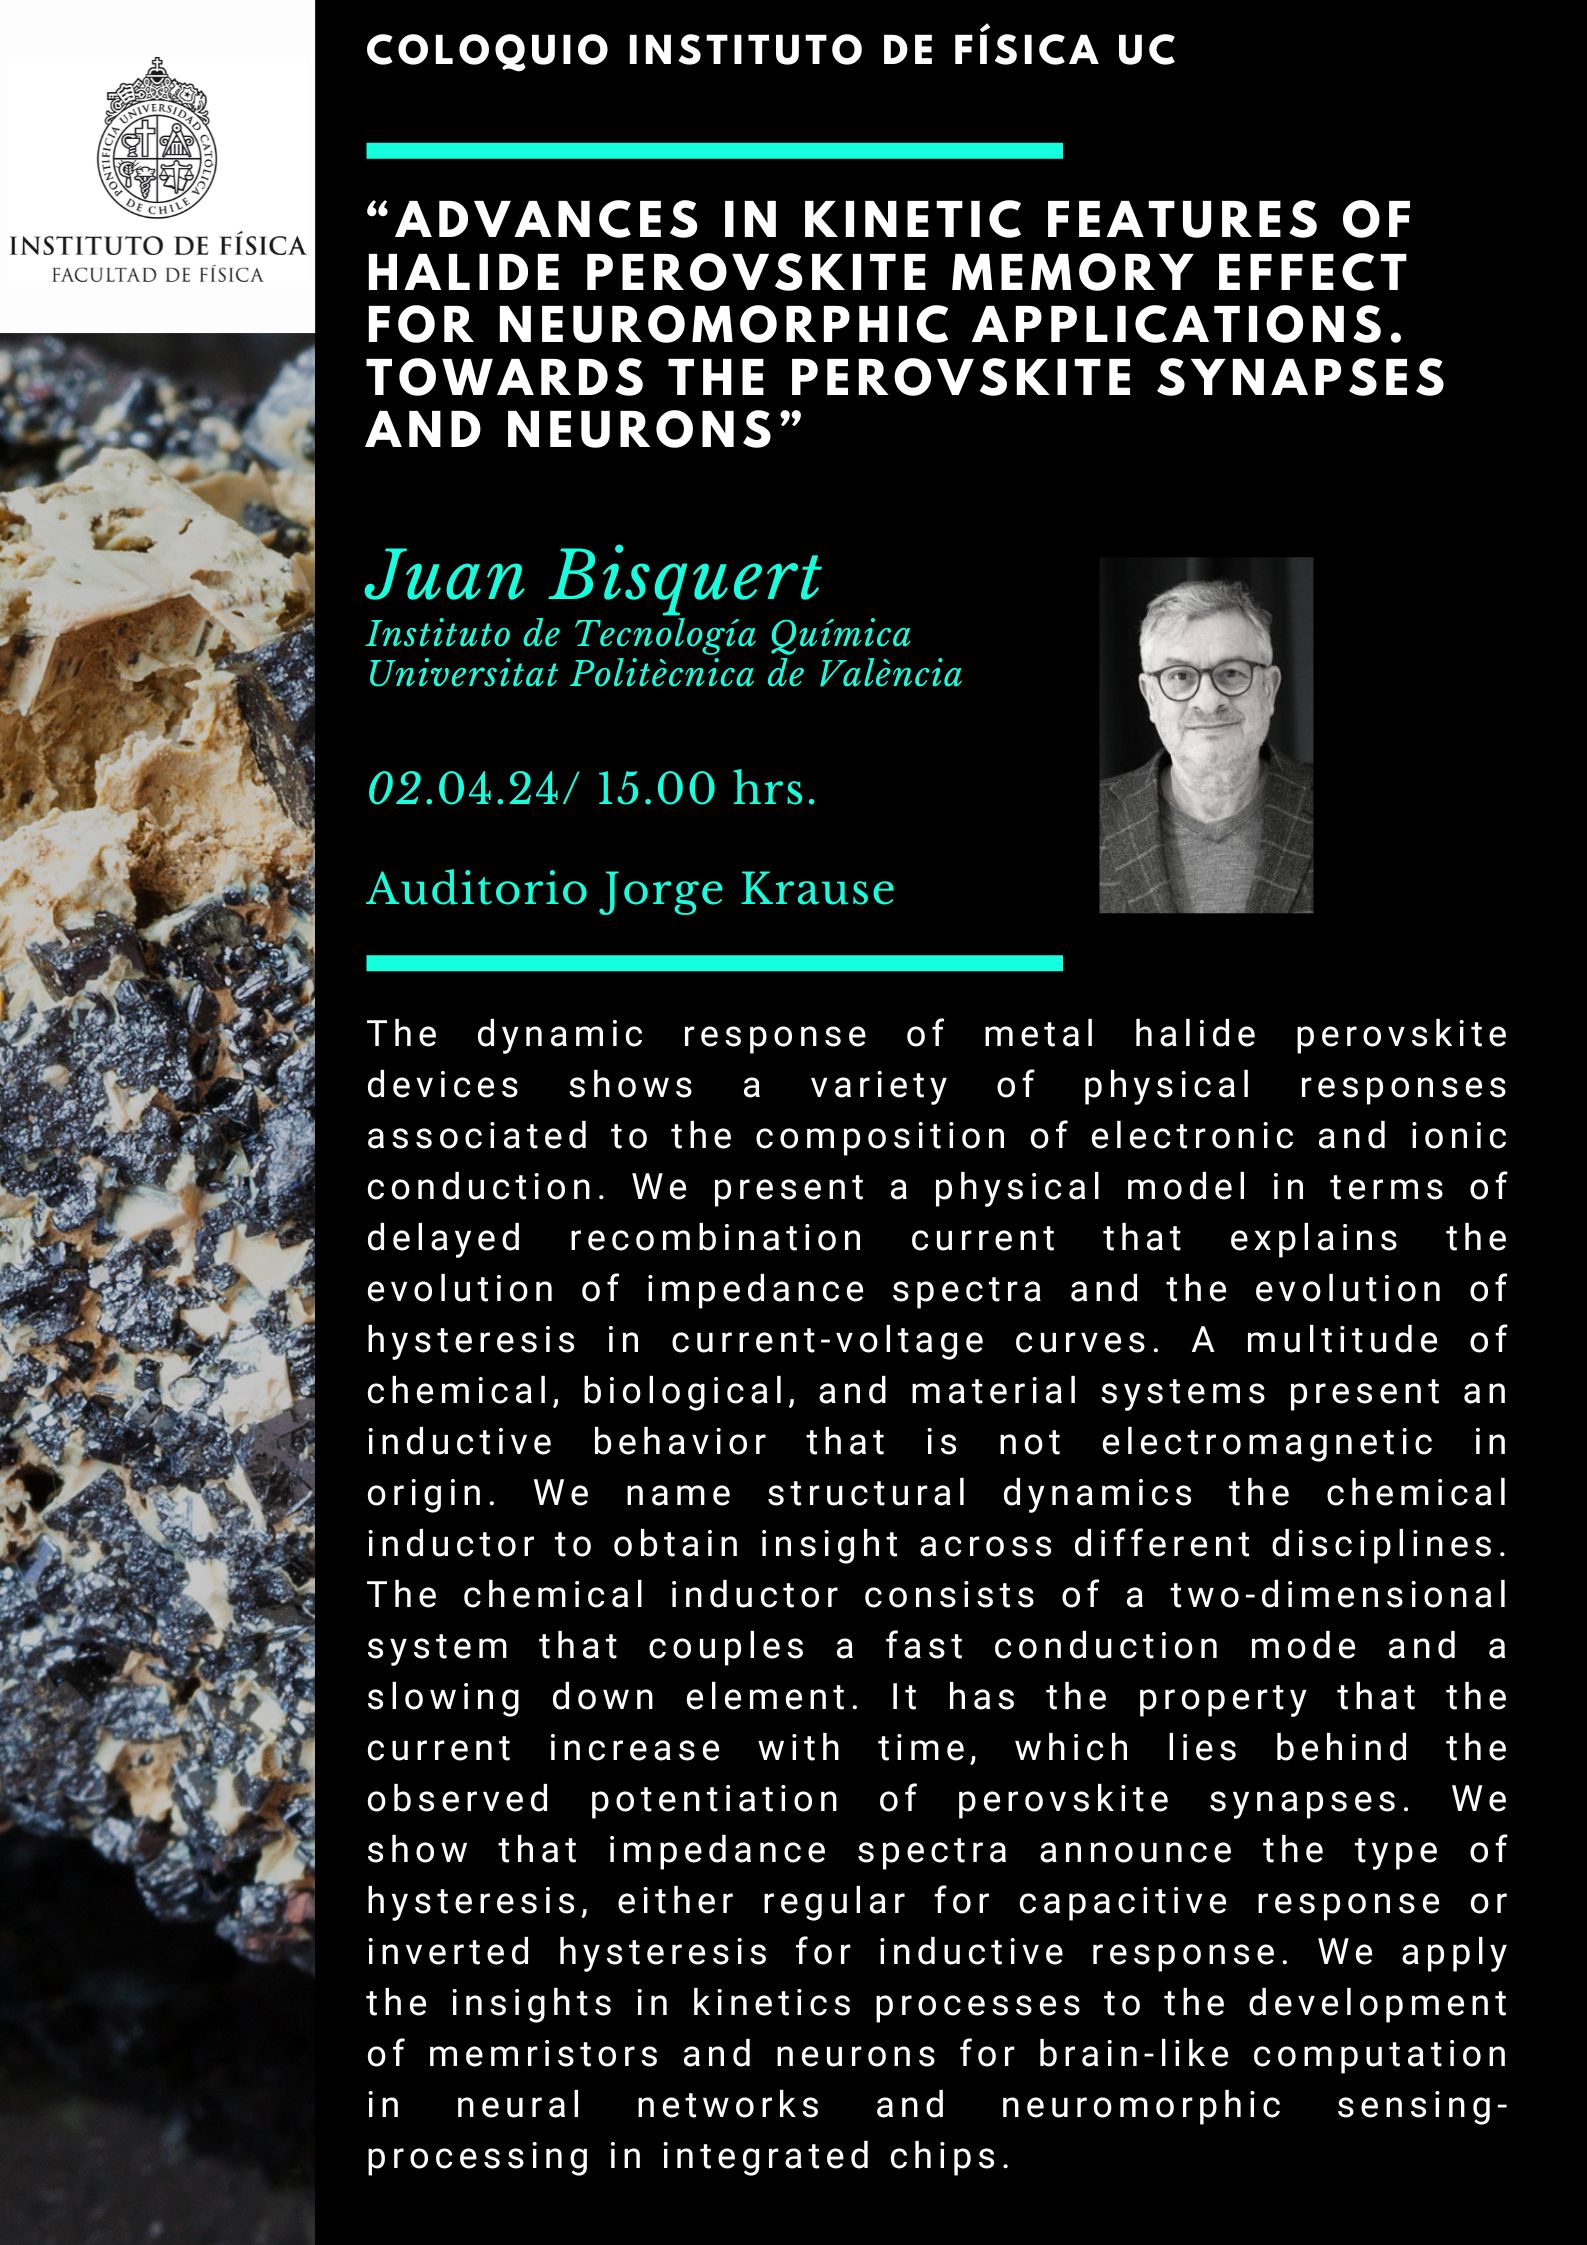 Participa del póximo coloquio &quot;Advances in kinetic features of halide perovskite memory effect for neuromorphic applications. Towards the perovskite synapses and neurons&quot;, por  Juan Bisquert